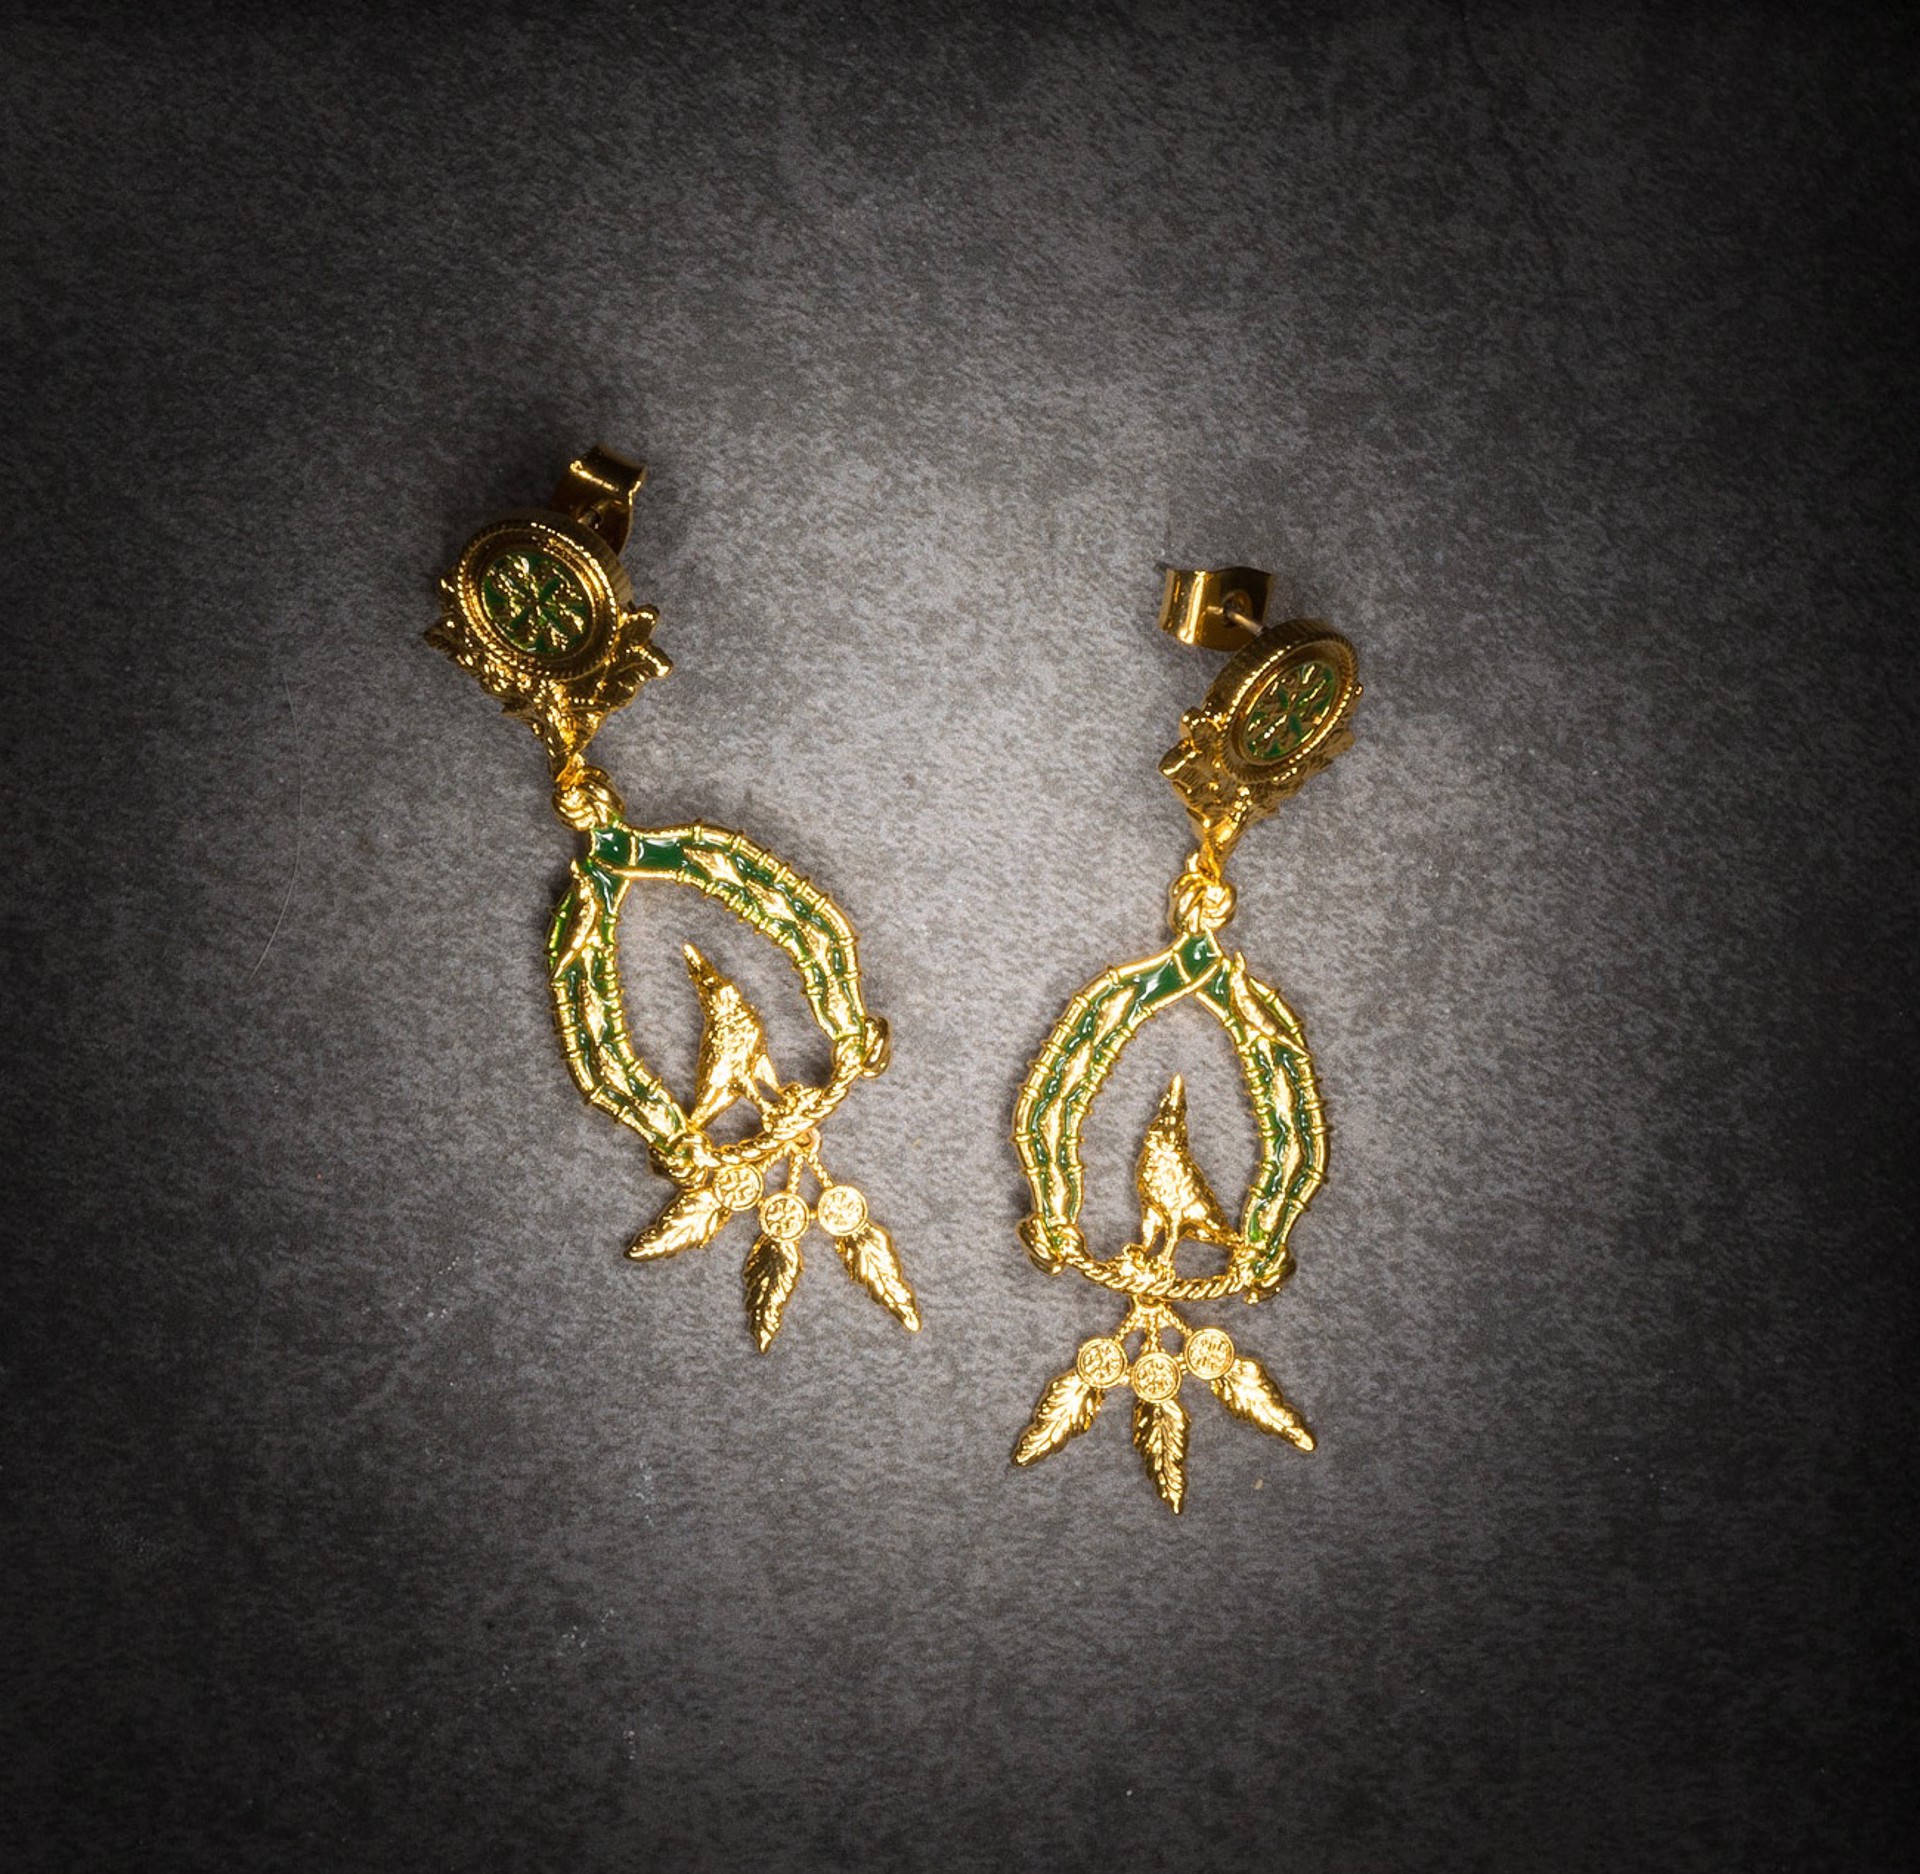 Vigor Earrings with Feathers - Gold and Green by Angela Mia